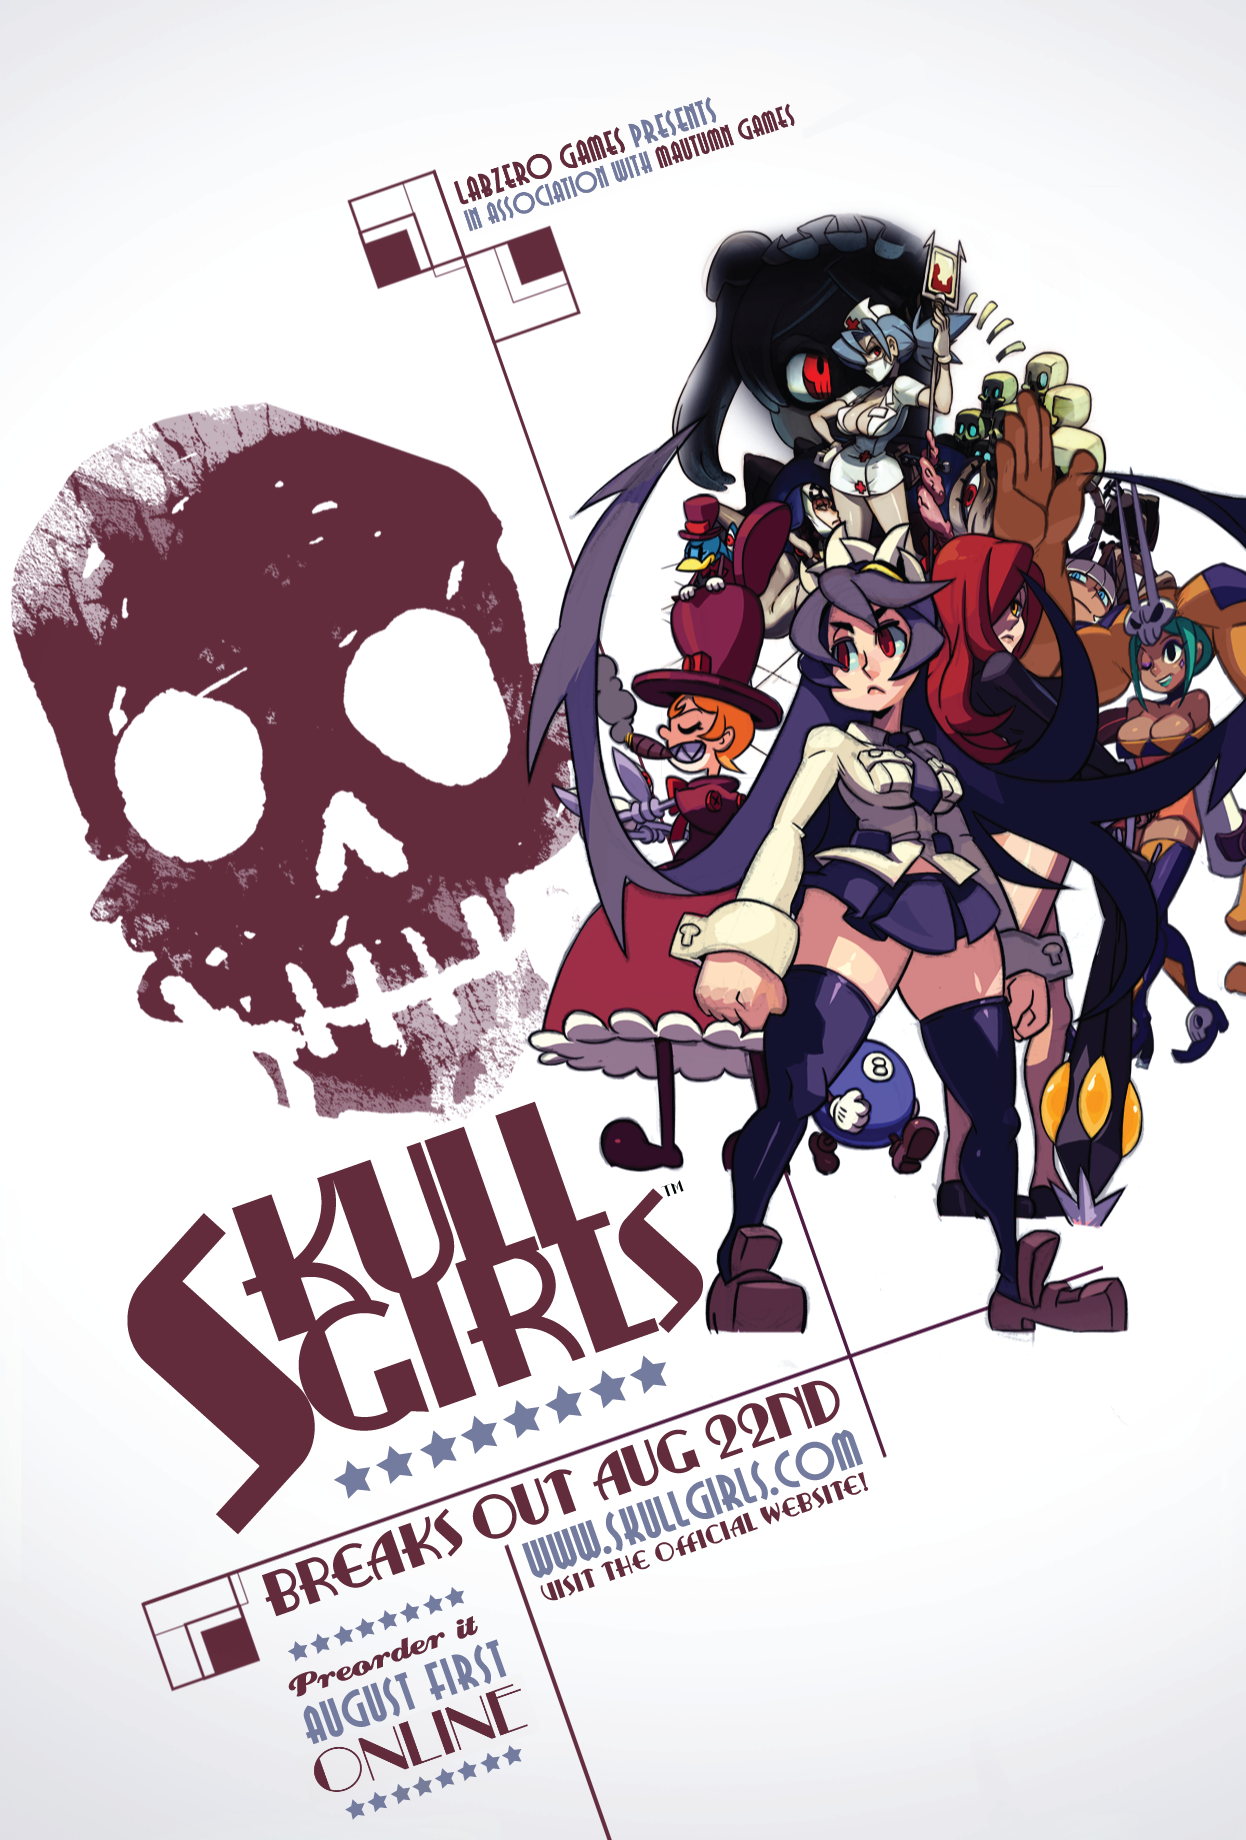 Skullgirls 2nd Encore - PC Release Poster